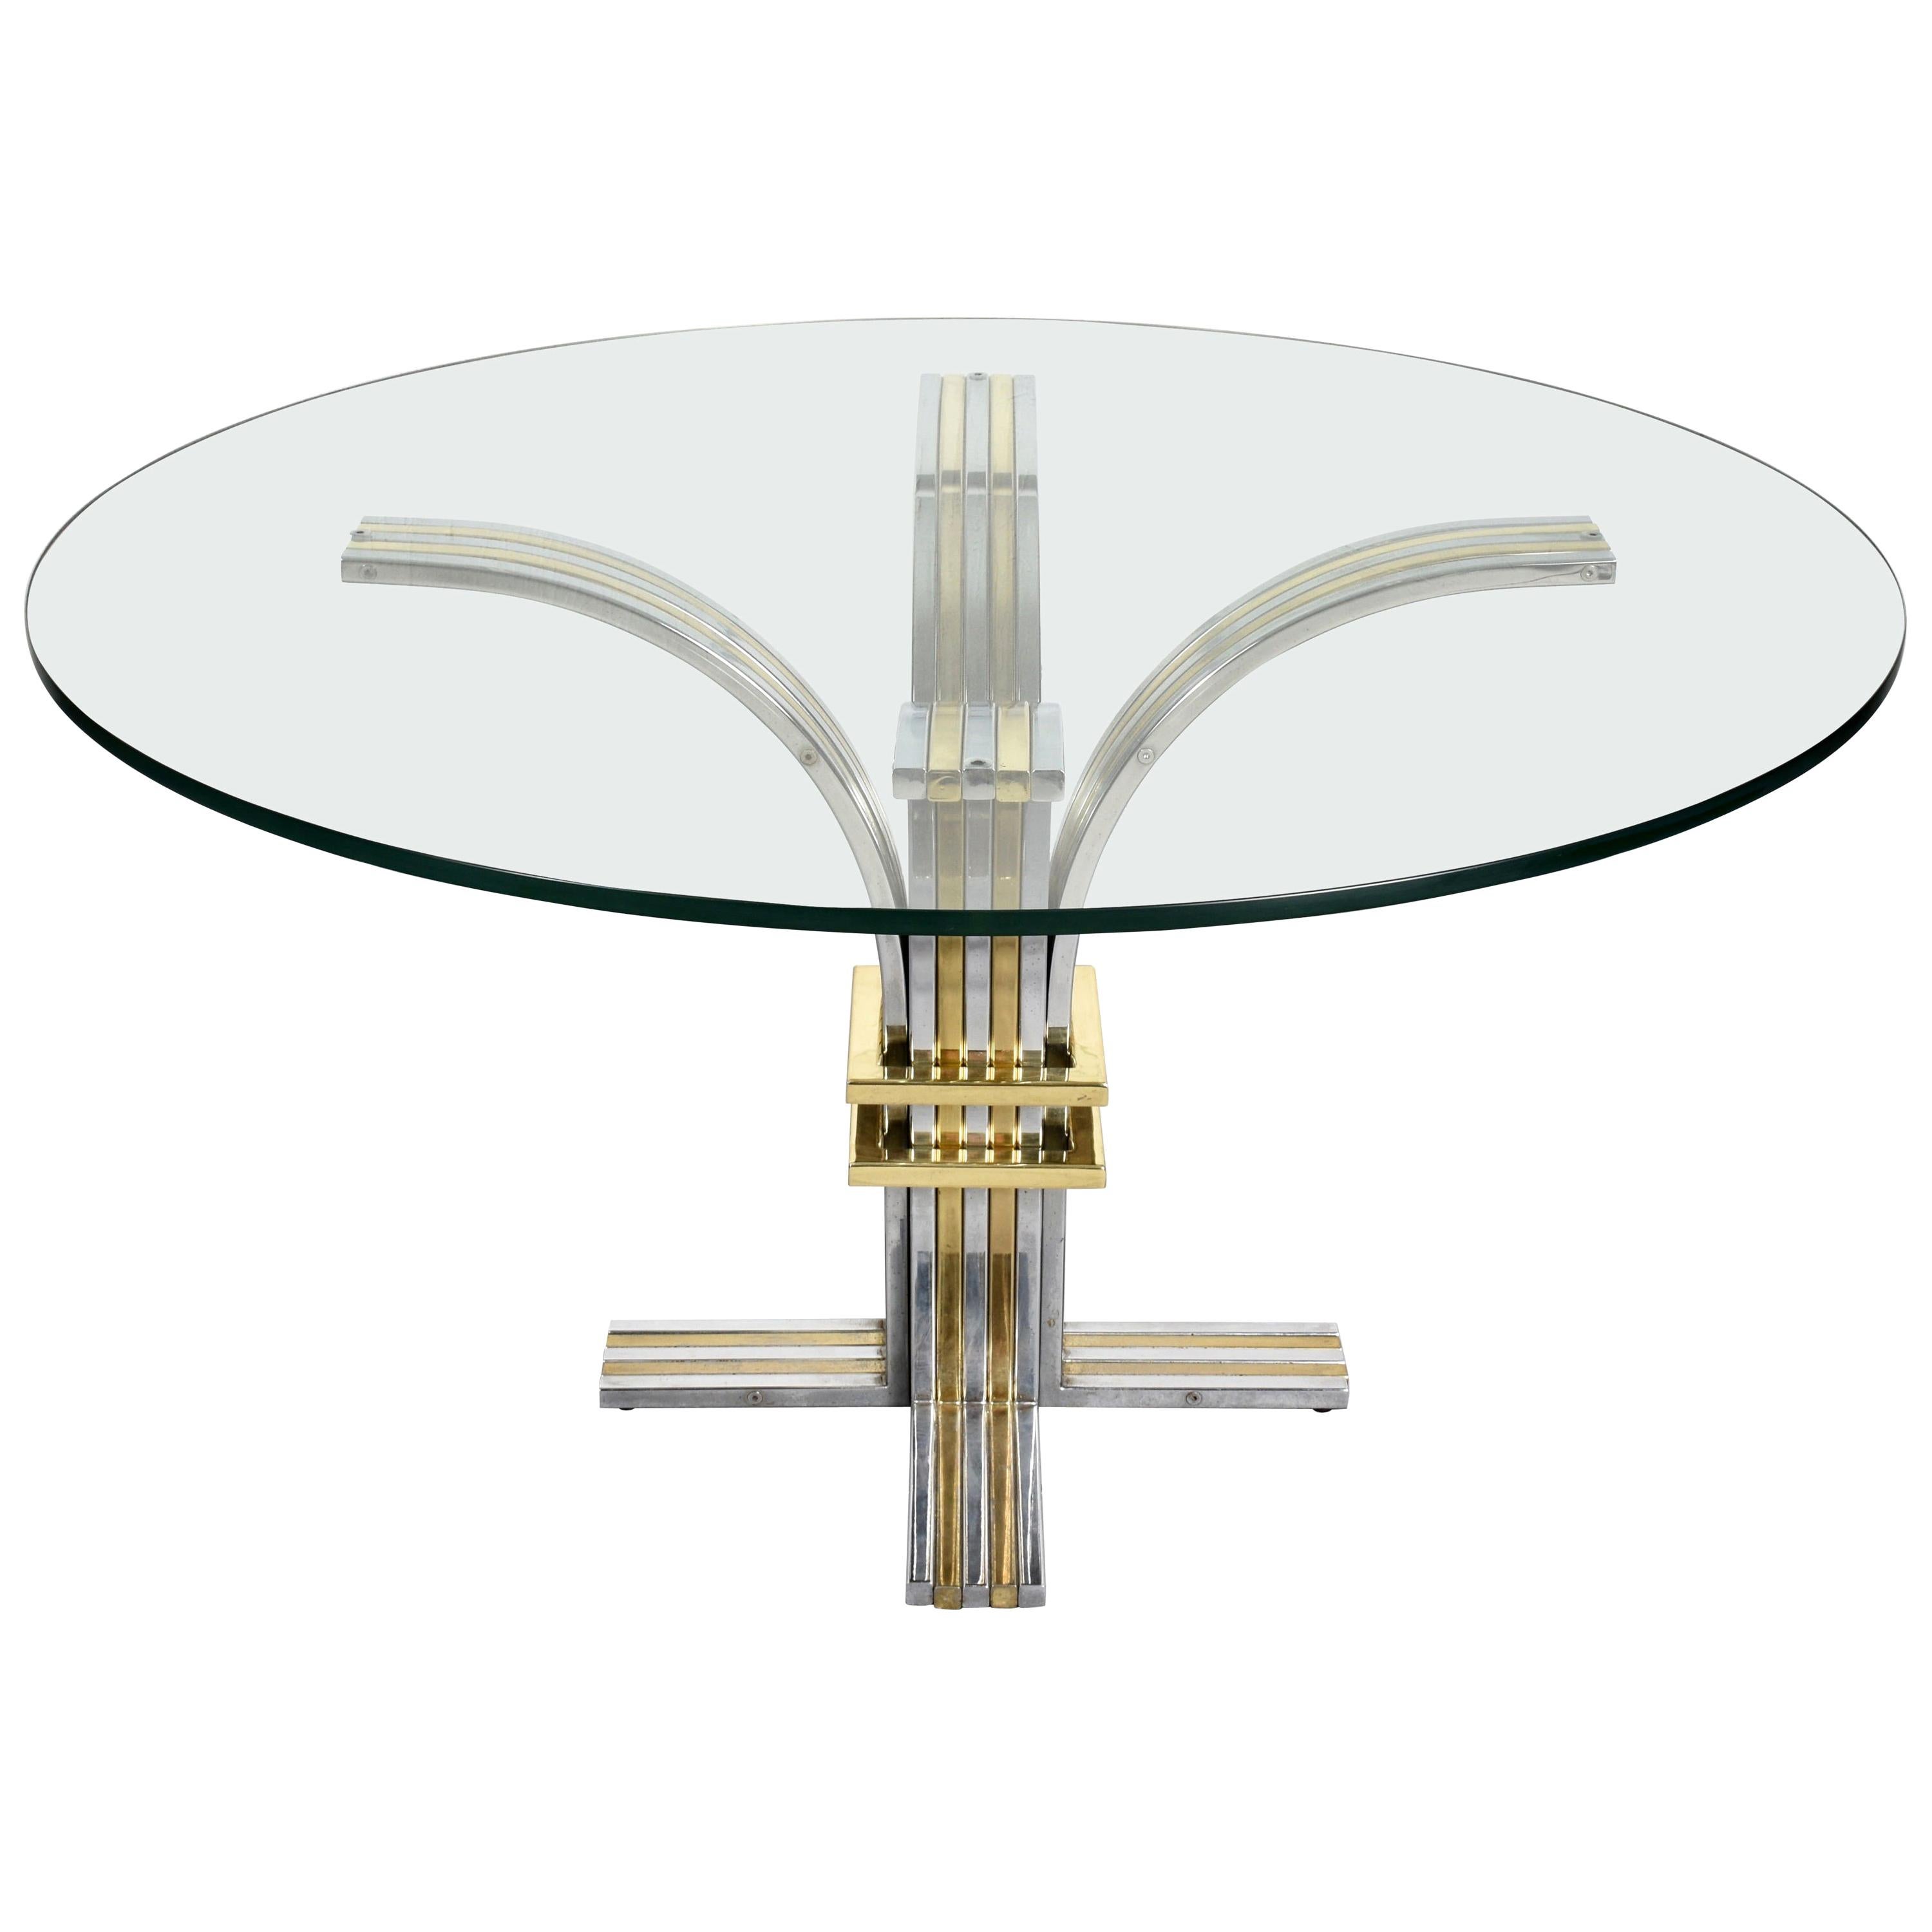 Banci and Firenze Midcentury Gilded Brass and Chromed Italian Dining Table 1970s